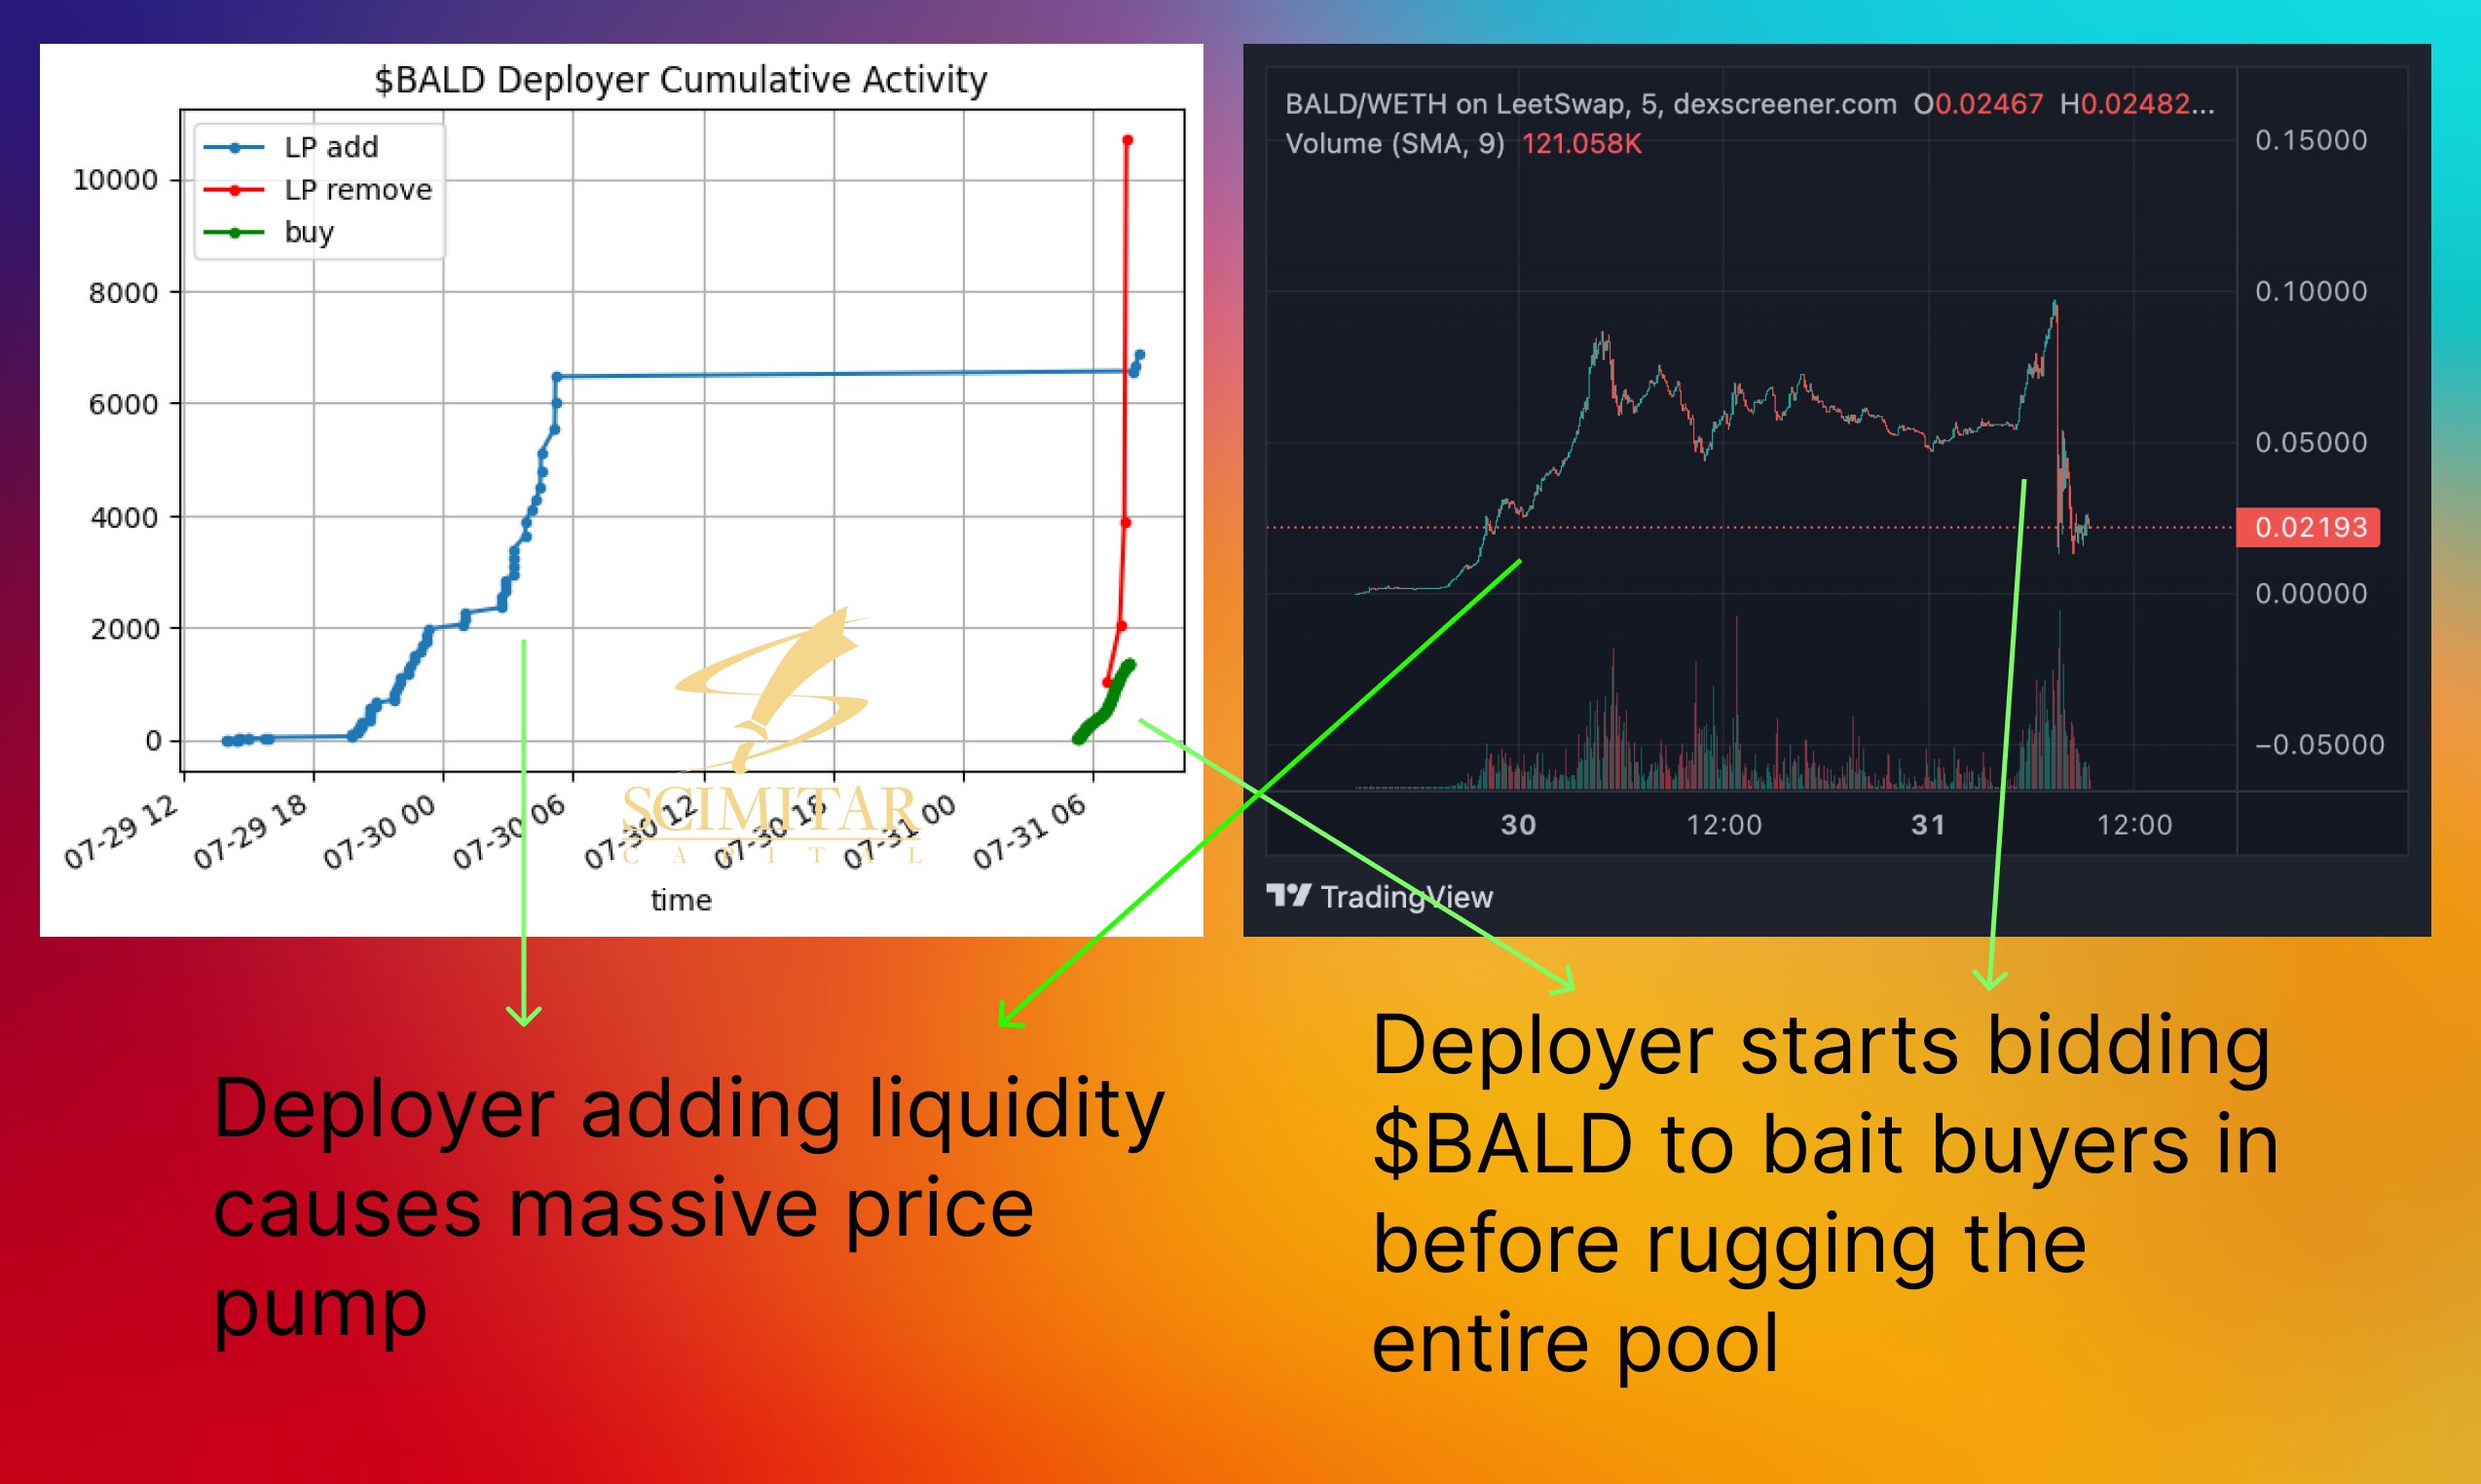 BALD deployer cumulative activity that lured degen traders to the pool